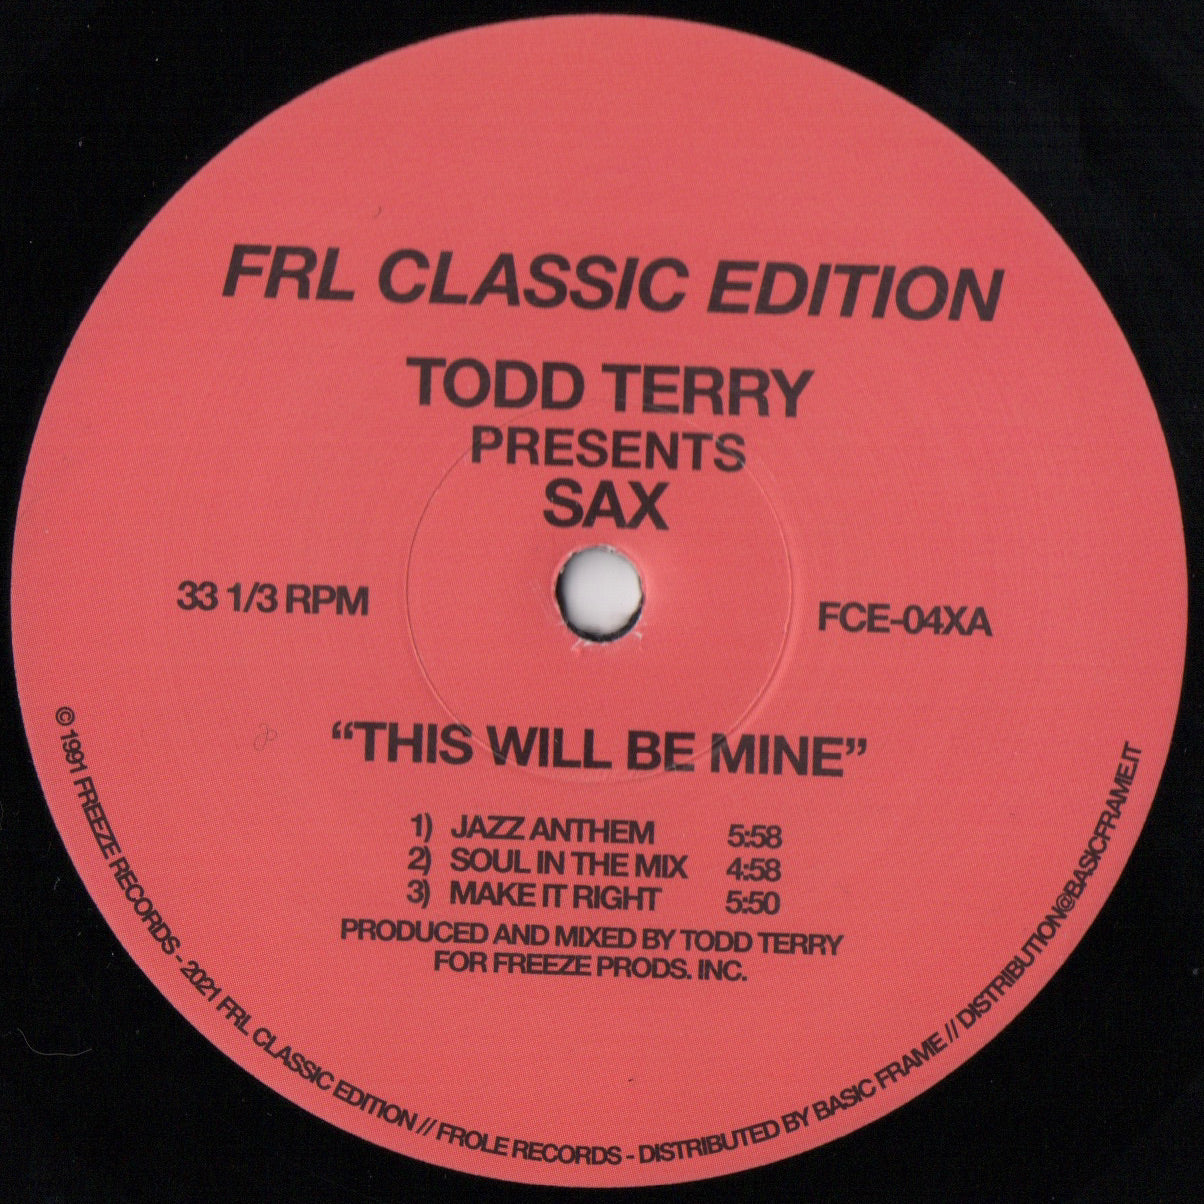 TODD TERRY PRESENTS SAX / THIS WILL BE MINE PART.1